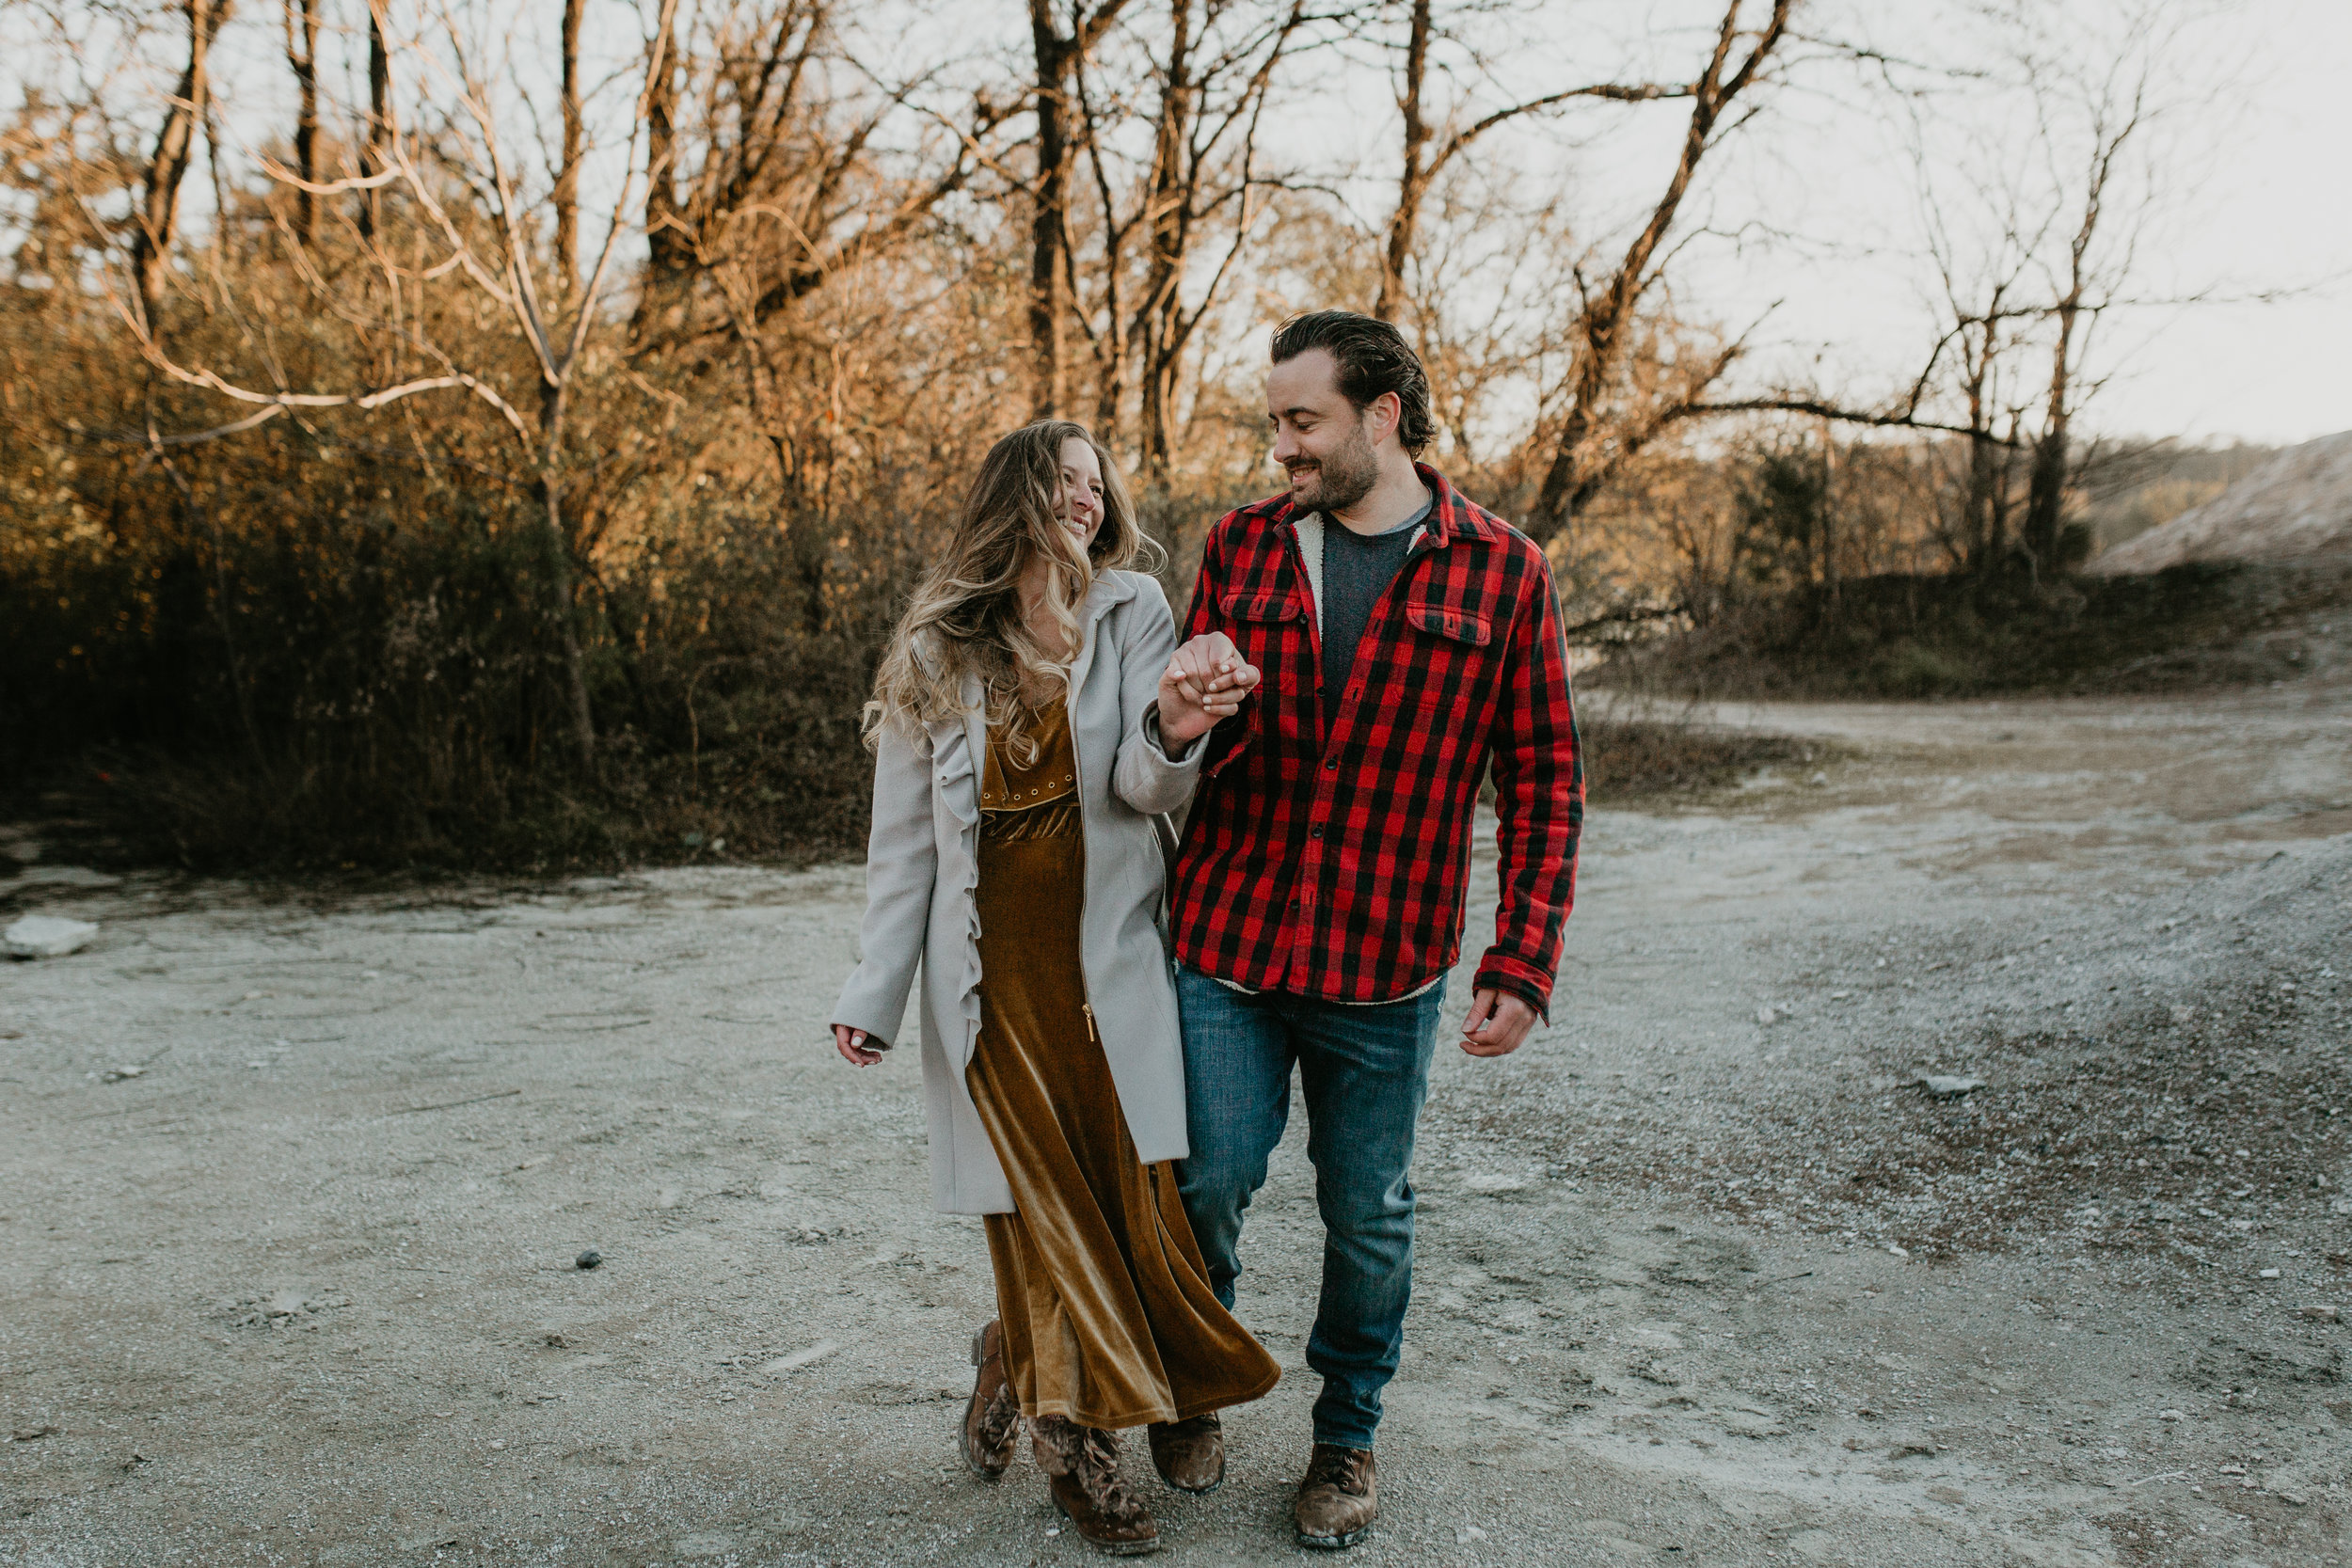 nicole-daacke-photography-white-cliffs-of-conoy-in-lancaster-pa-pennsylvania-adventure-session-adventure-elopement-photographer-engagement session-in-lancaster-pa-photographer-golden-sunset-winter-solstice-wedding-riverside-elopement-4097.jpg